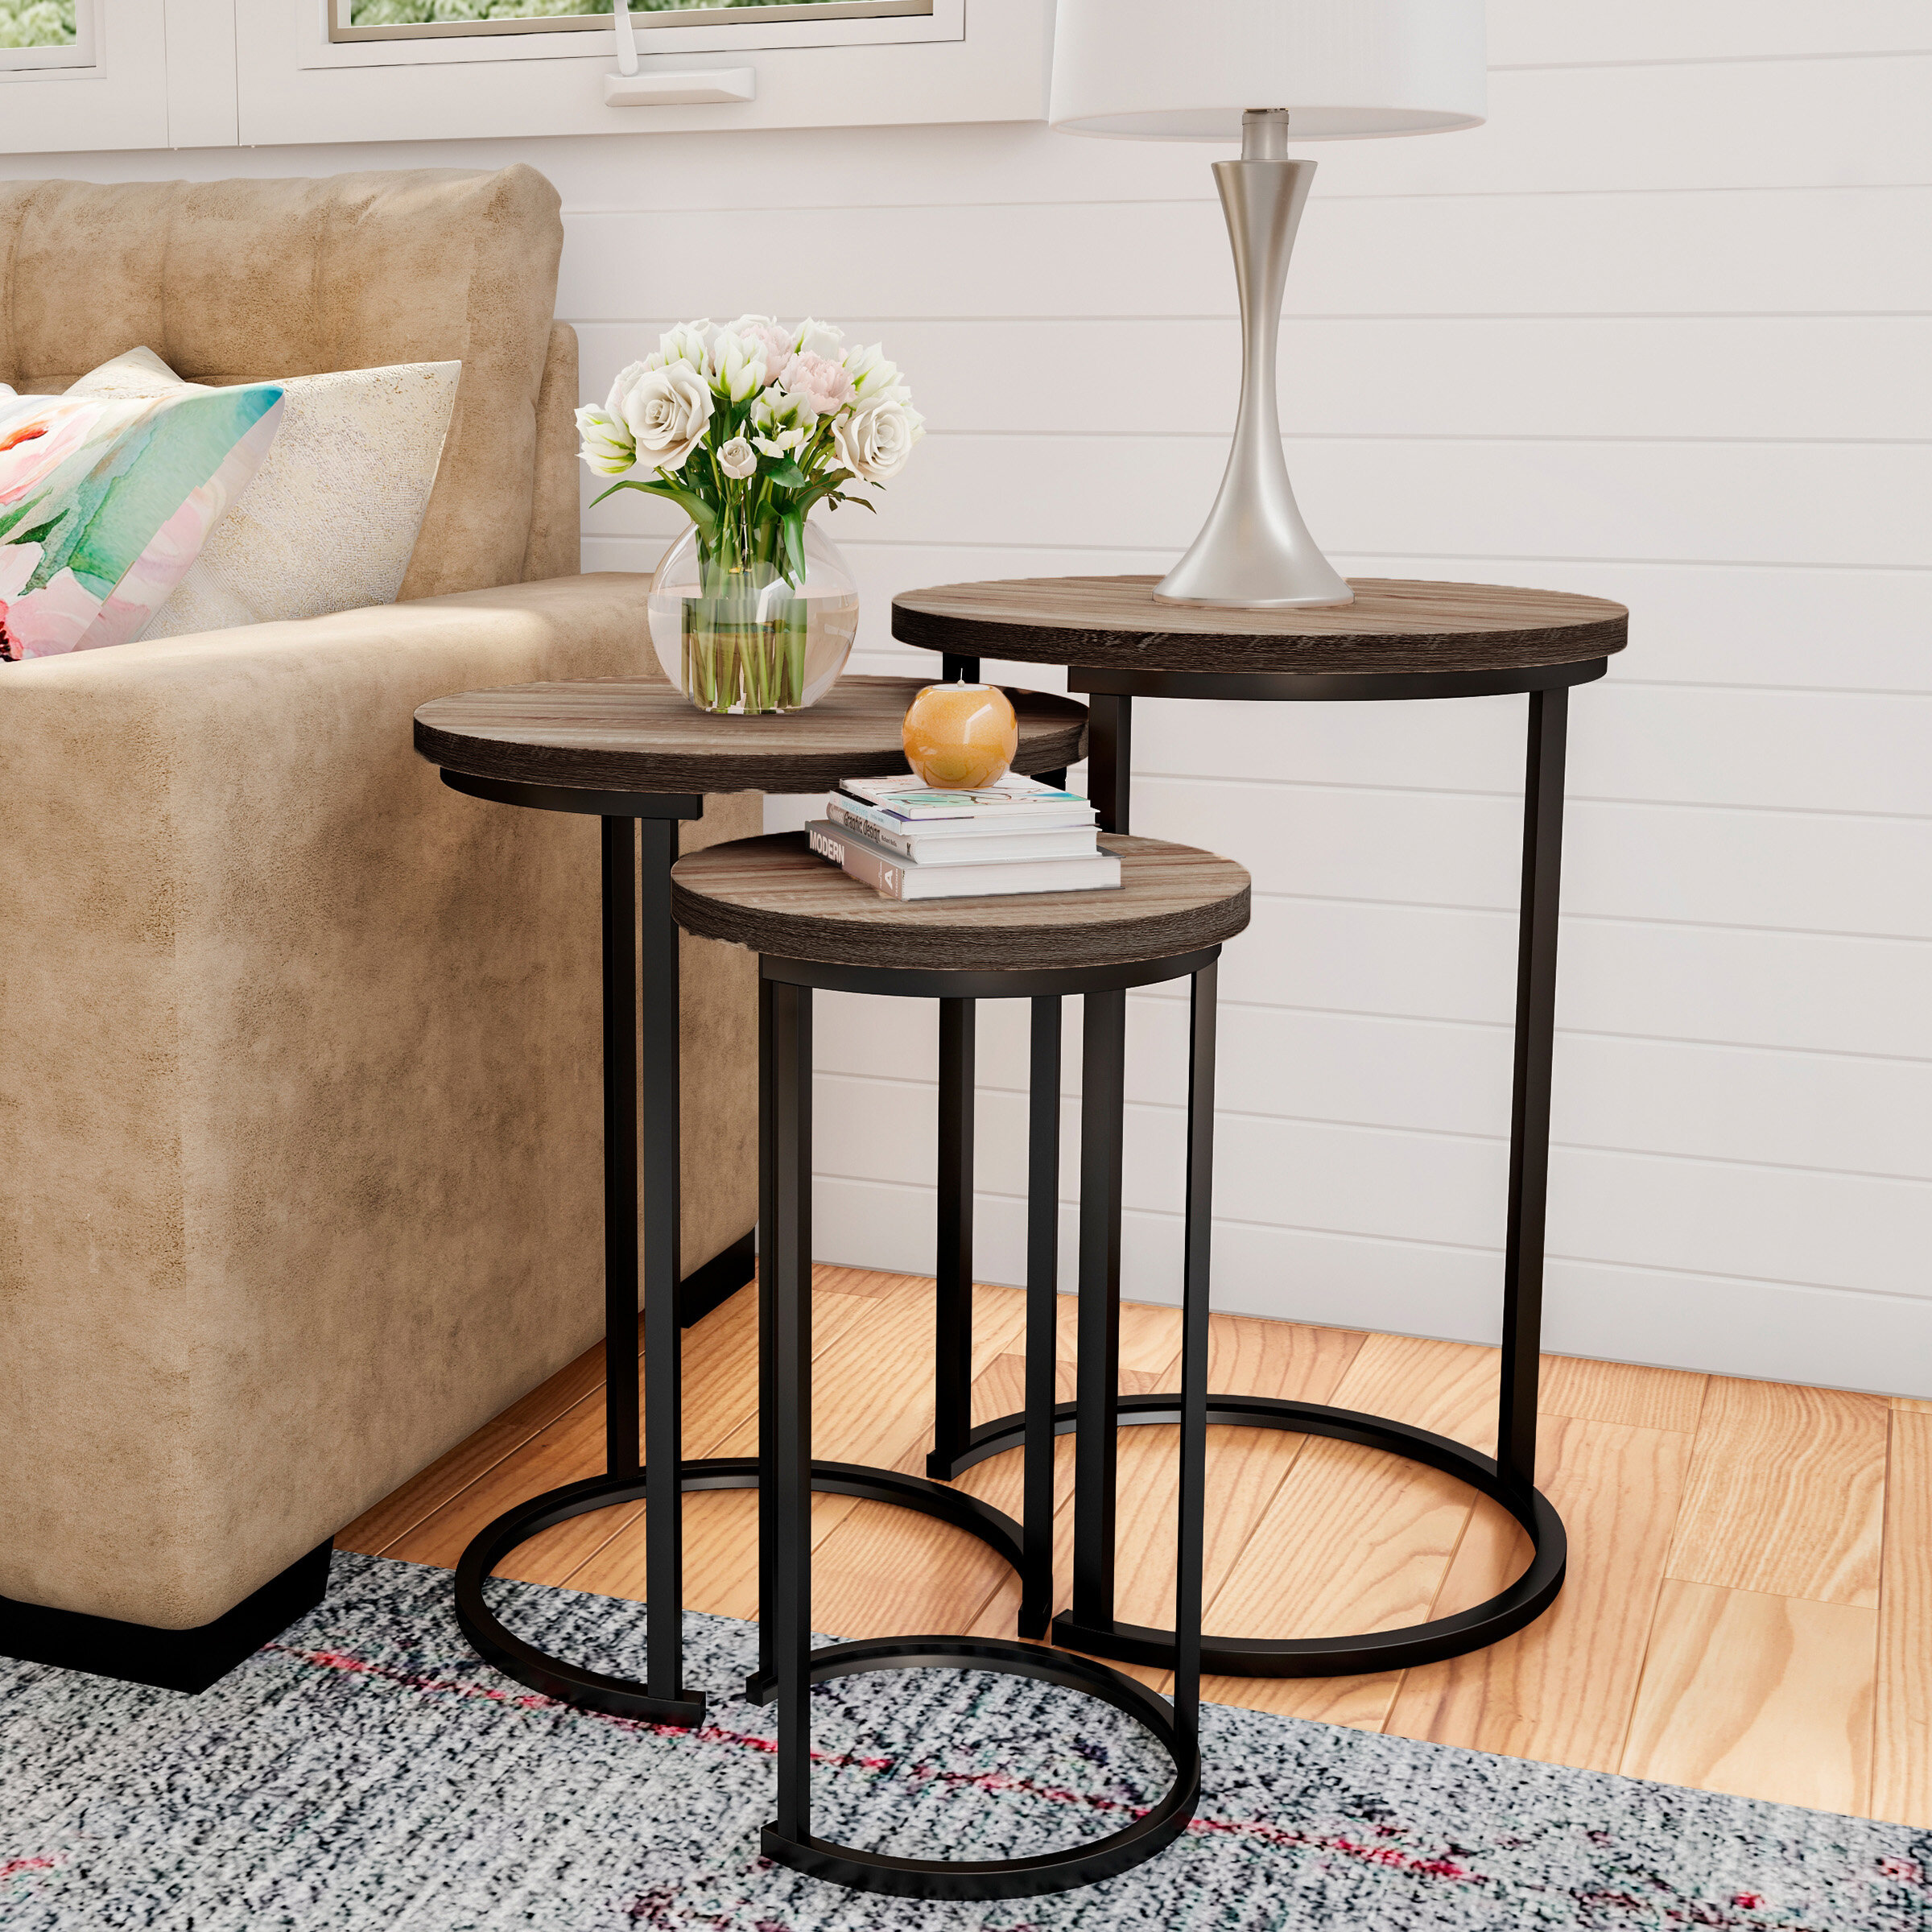 Homfa Round Coffee Table Set of 2 Side Table Industrial Nesting Tables Tea Table Bedside Table with Metal Stand